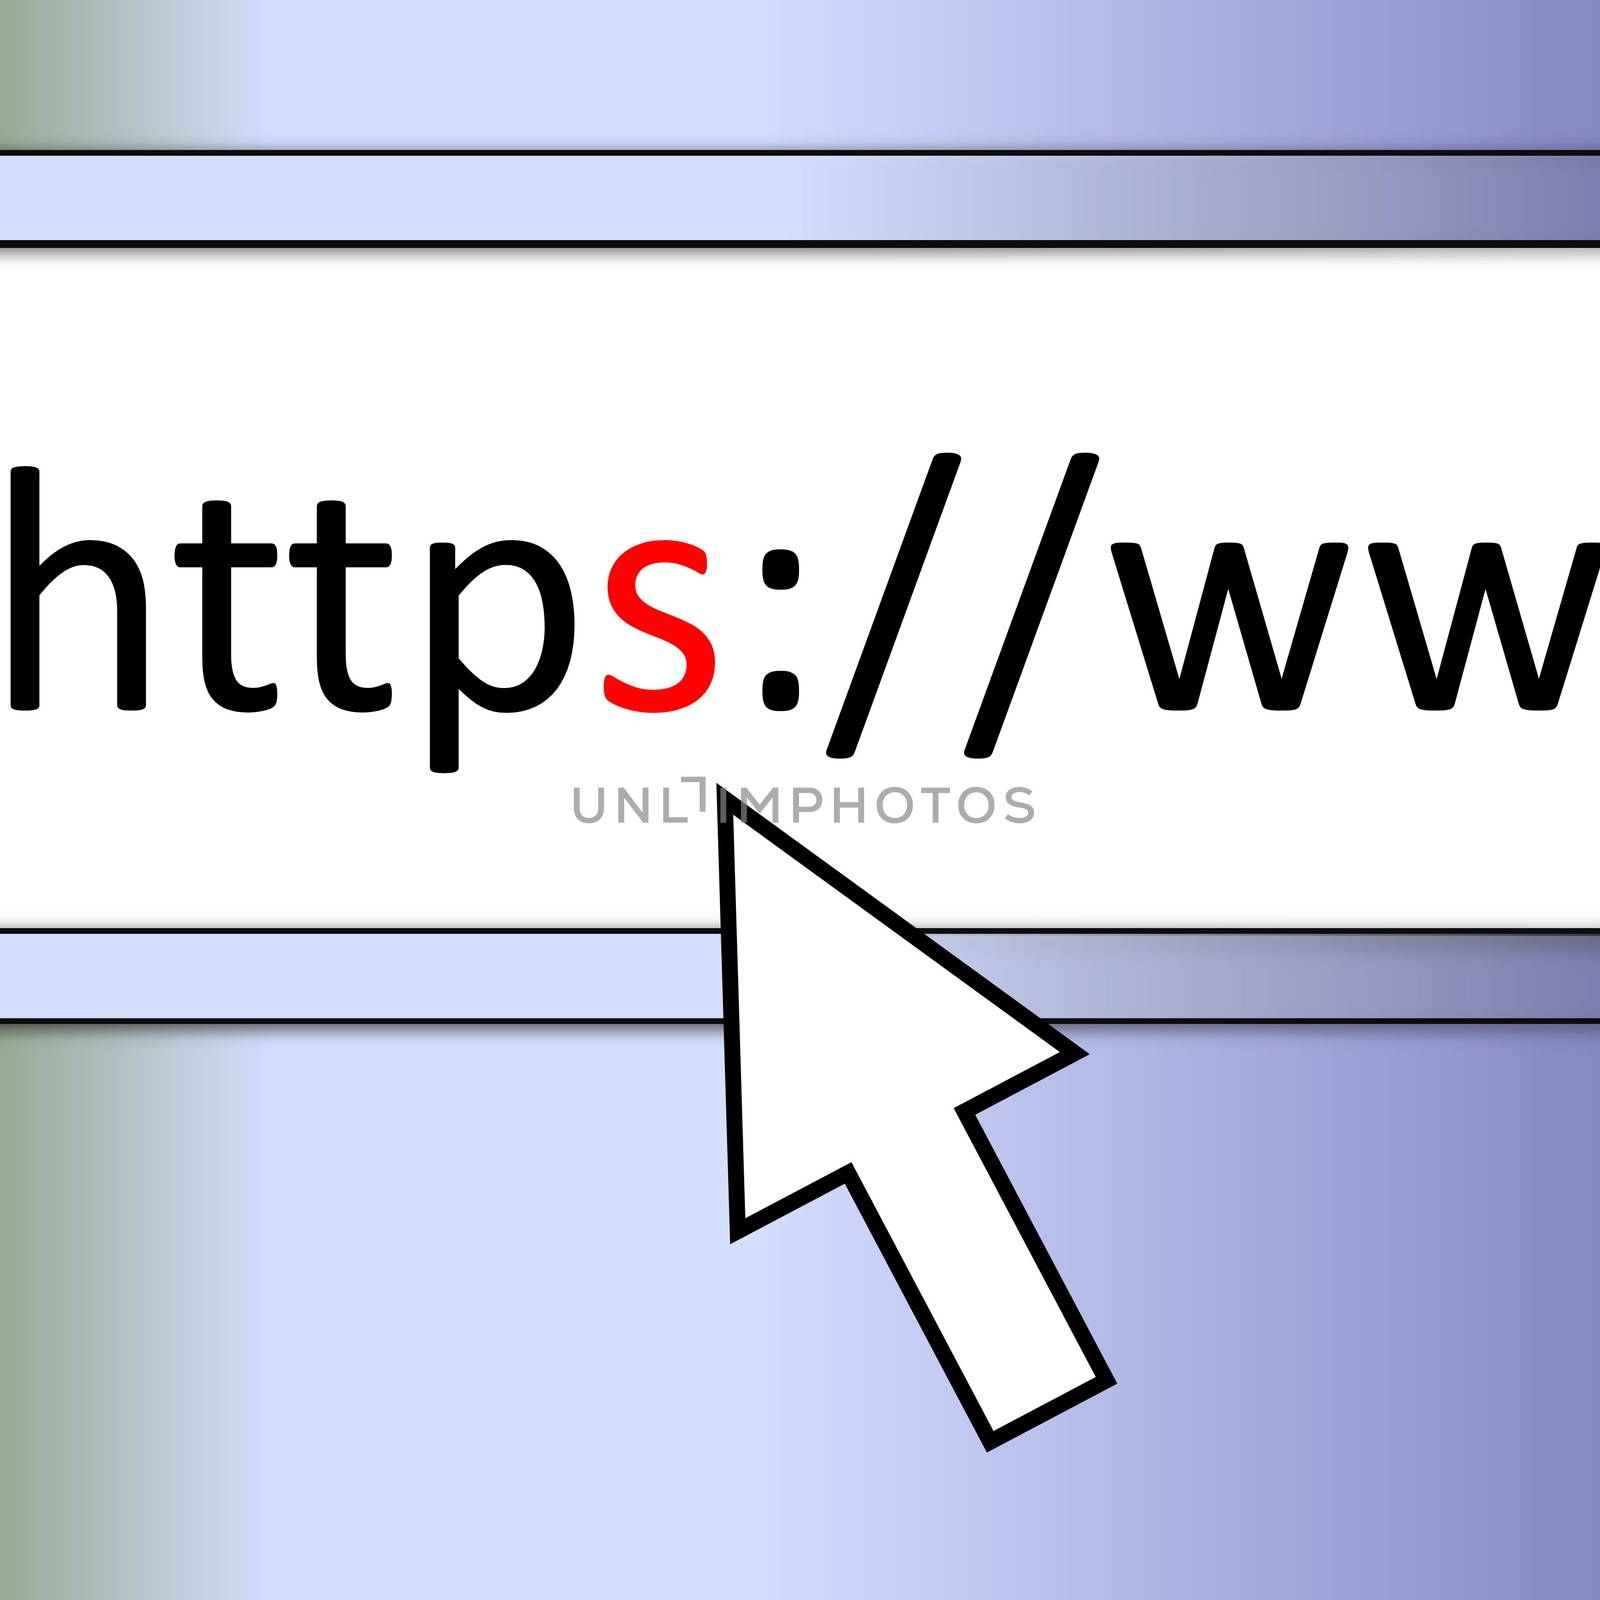 Secured connection with https by Elenaphotos21